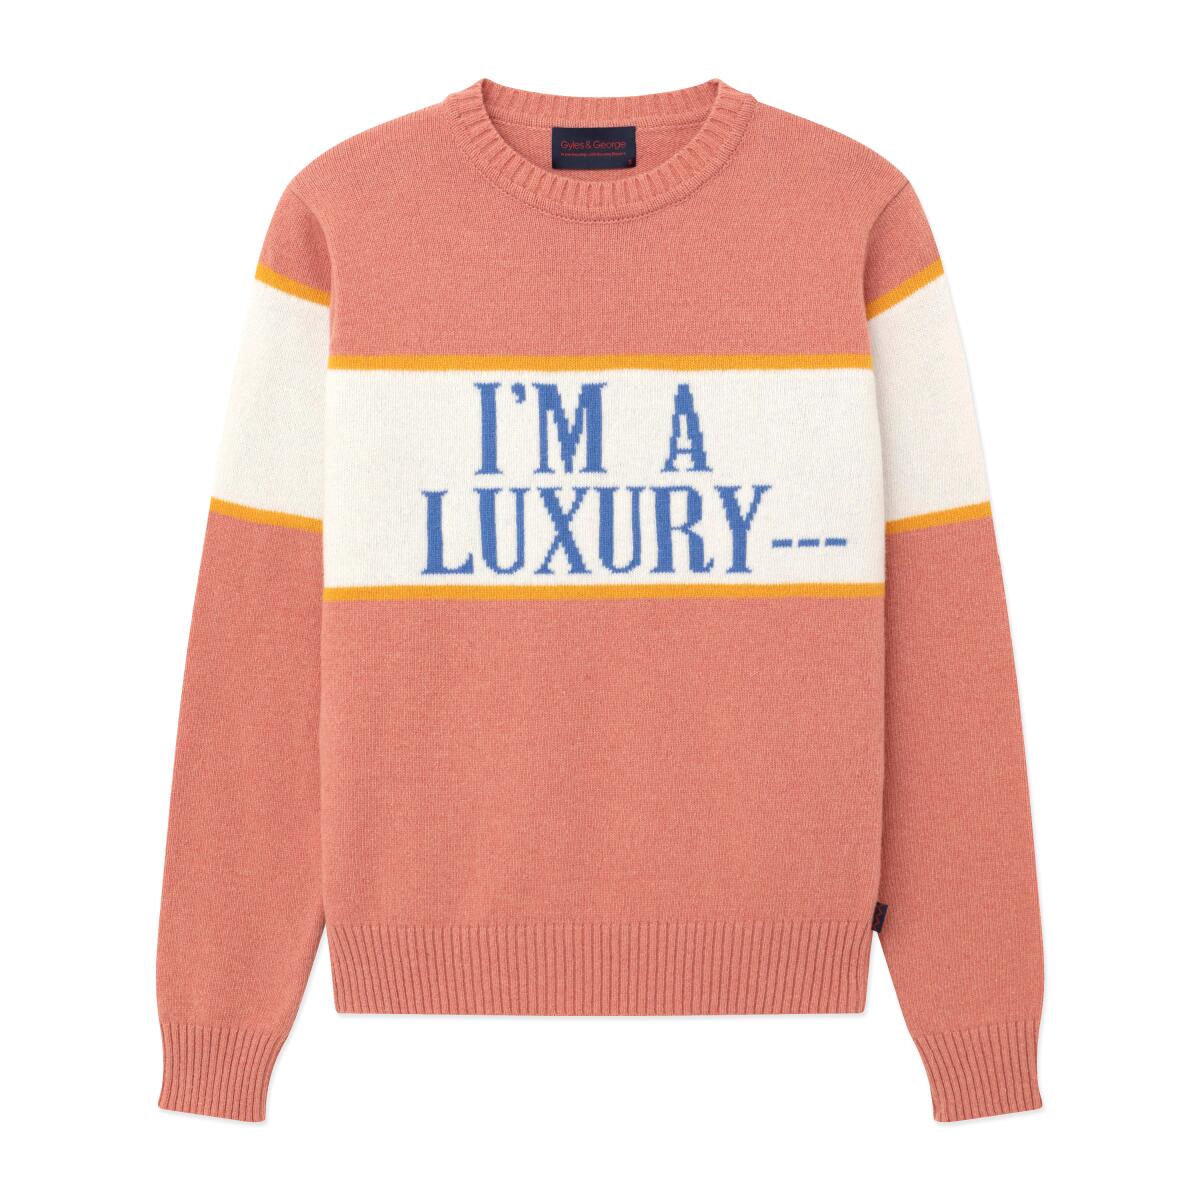 A photo of Rowing Blazers' "I'm a Luxury" sweater.